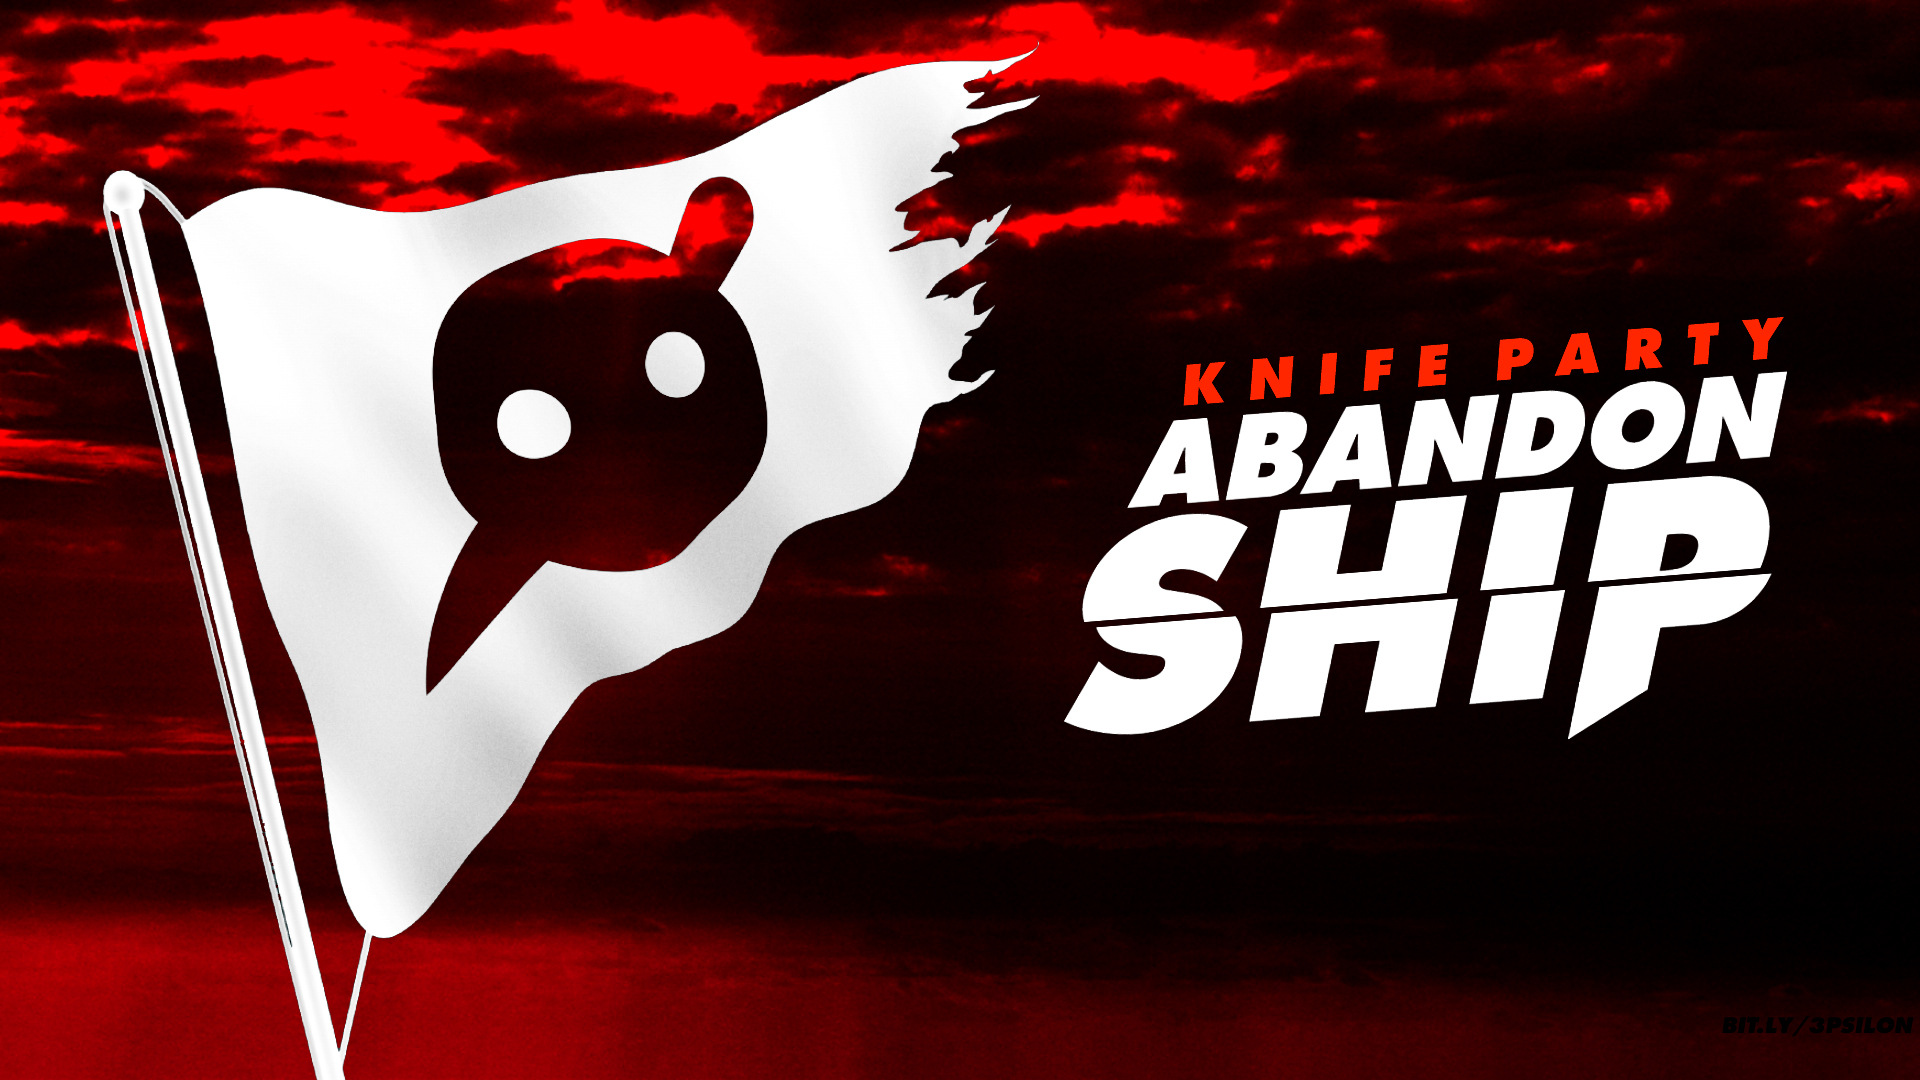 knife party rage valley wallpaper